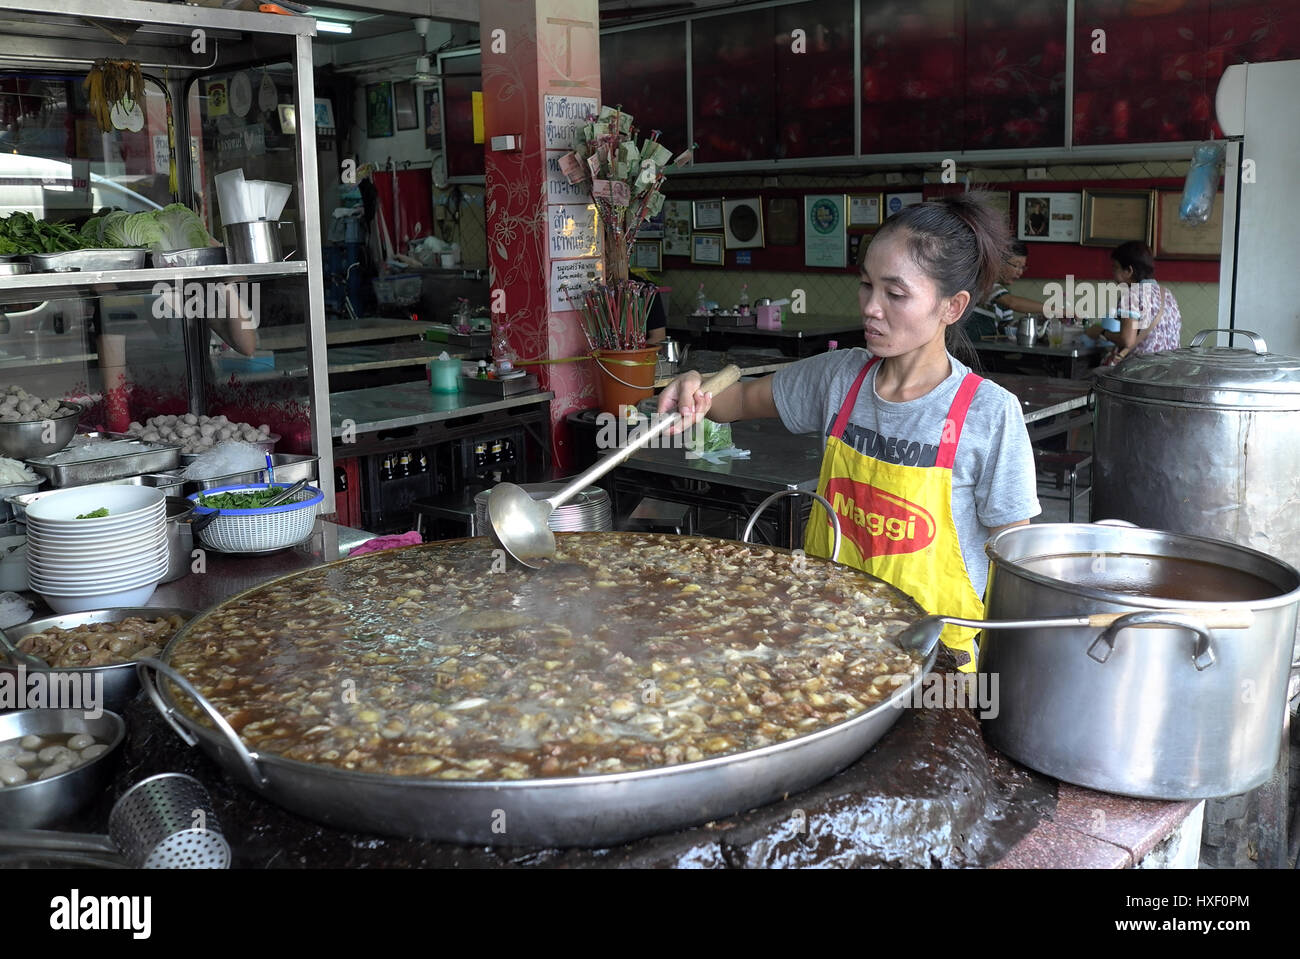 https://c8.alamy.com/comp/HXF0PM/thai-lady-cooking-a-big-pot-of-soup-at-a-local-restaurant-in-bangkok-HXF0PM.jpg